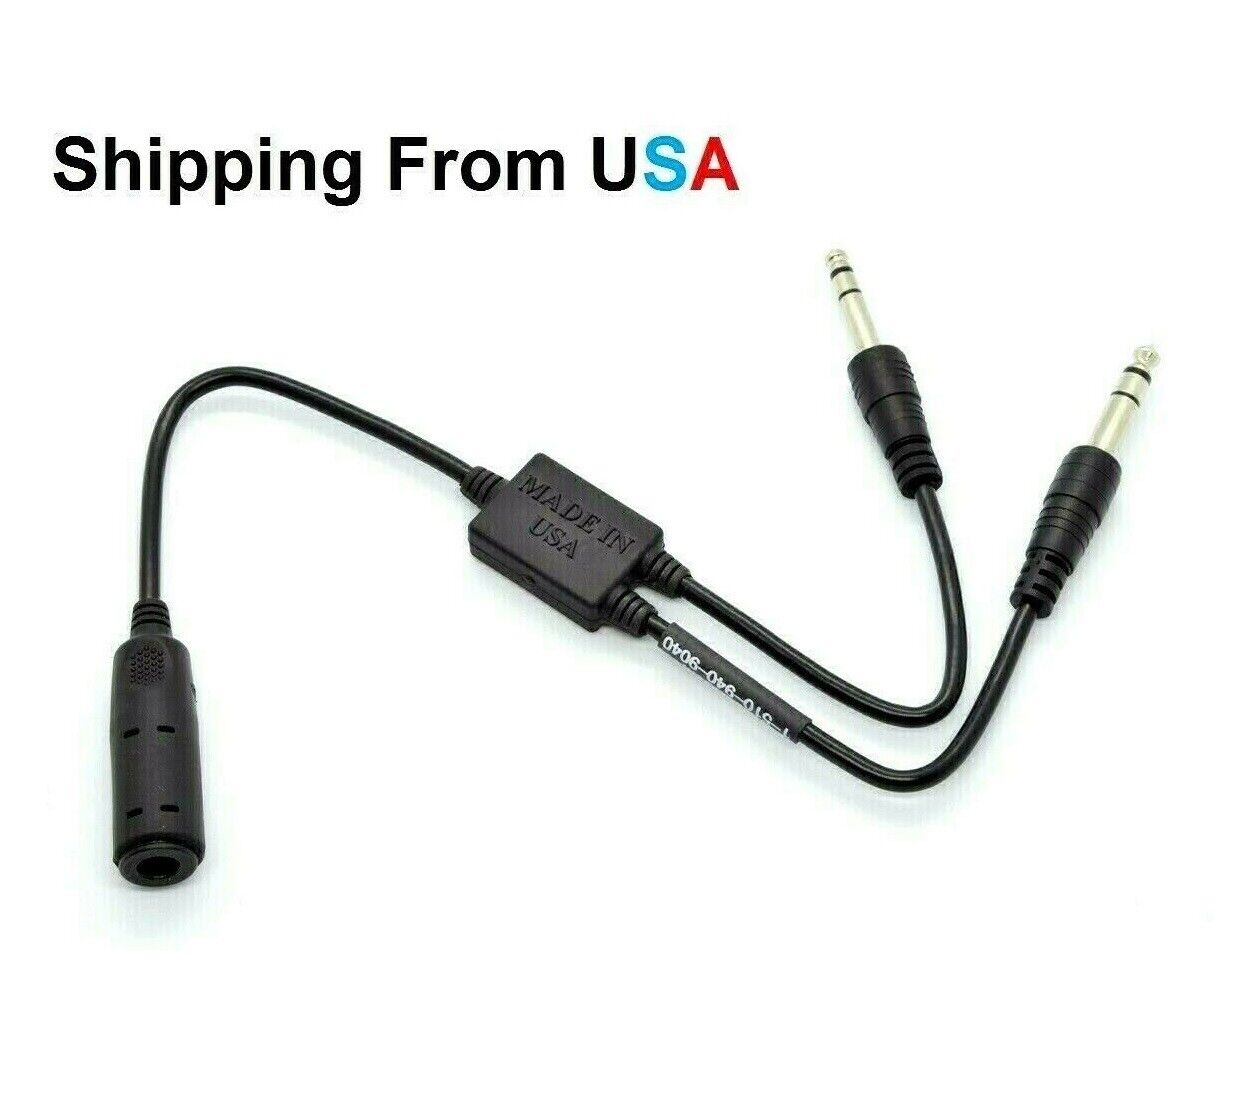 Low to High Headset Adapter, Dynamic To Civilian Headset Adapter